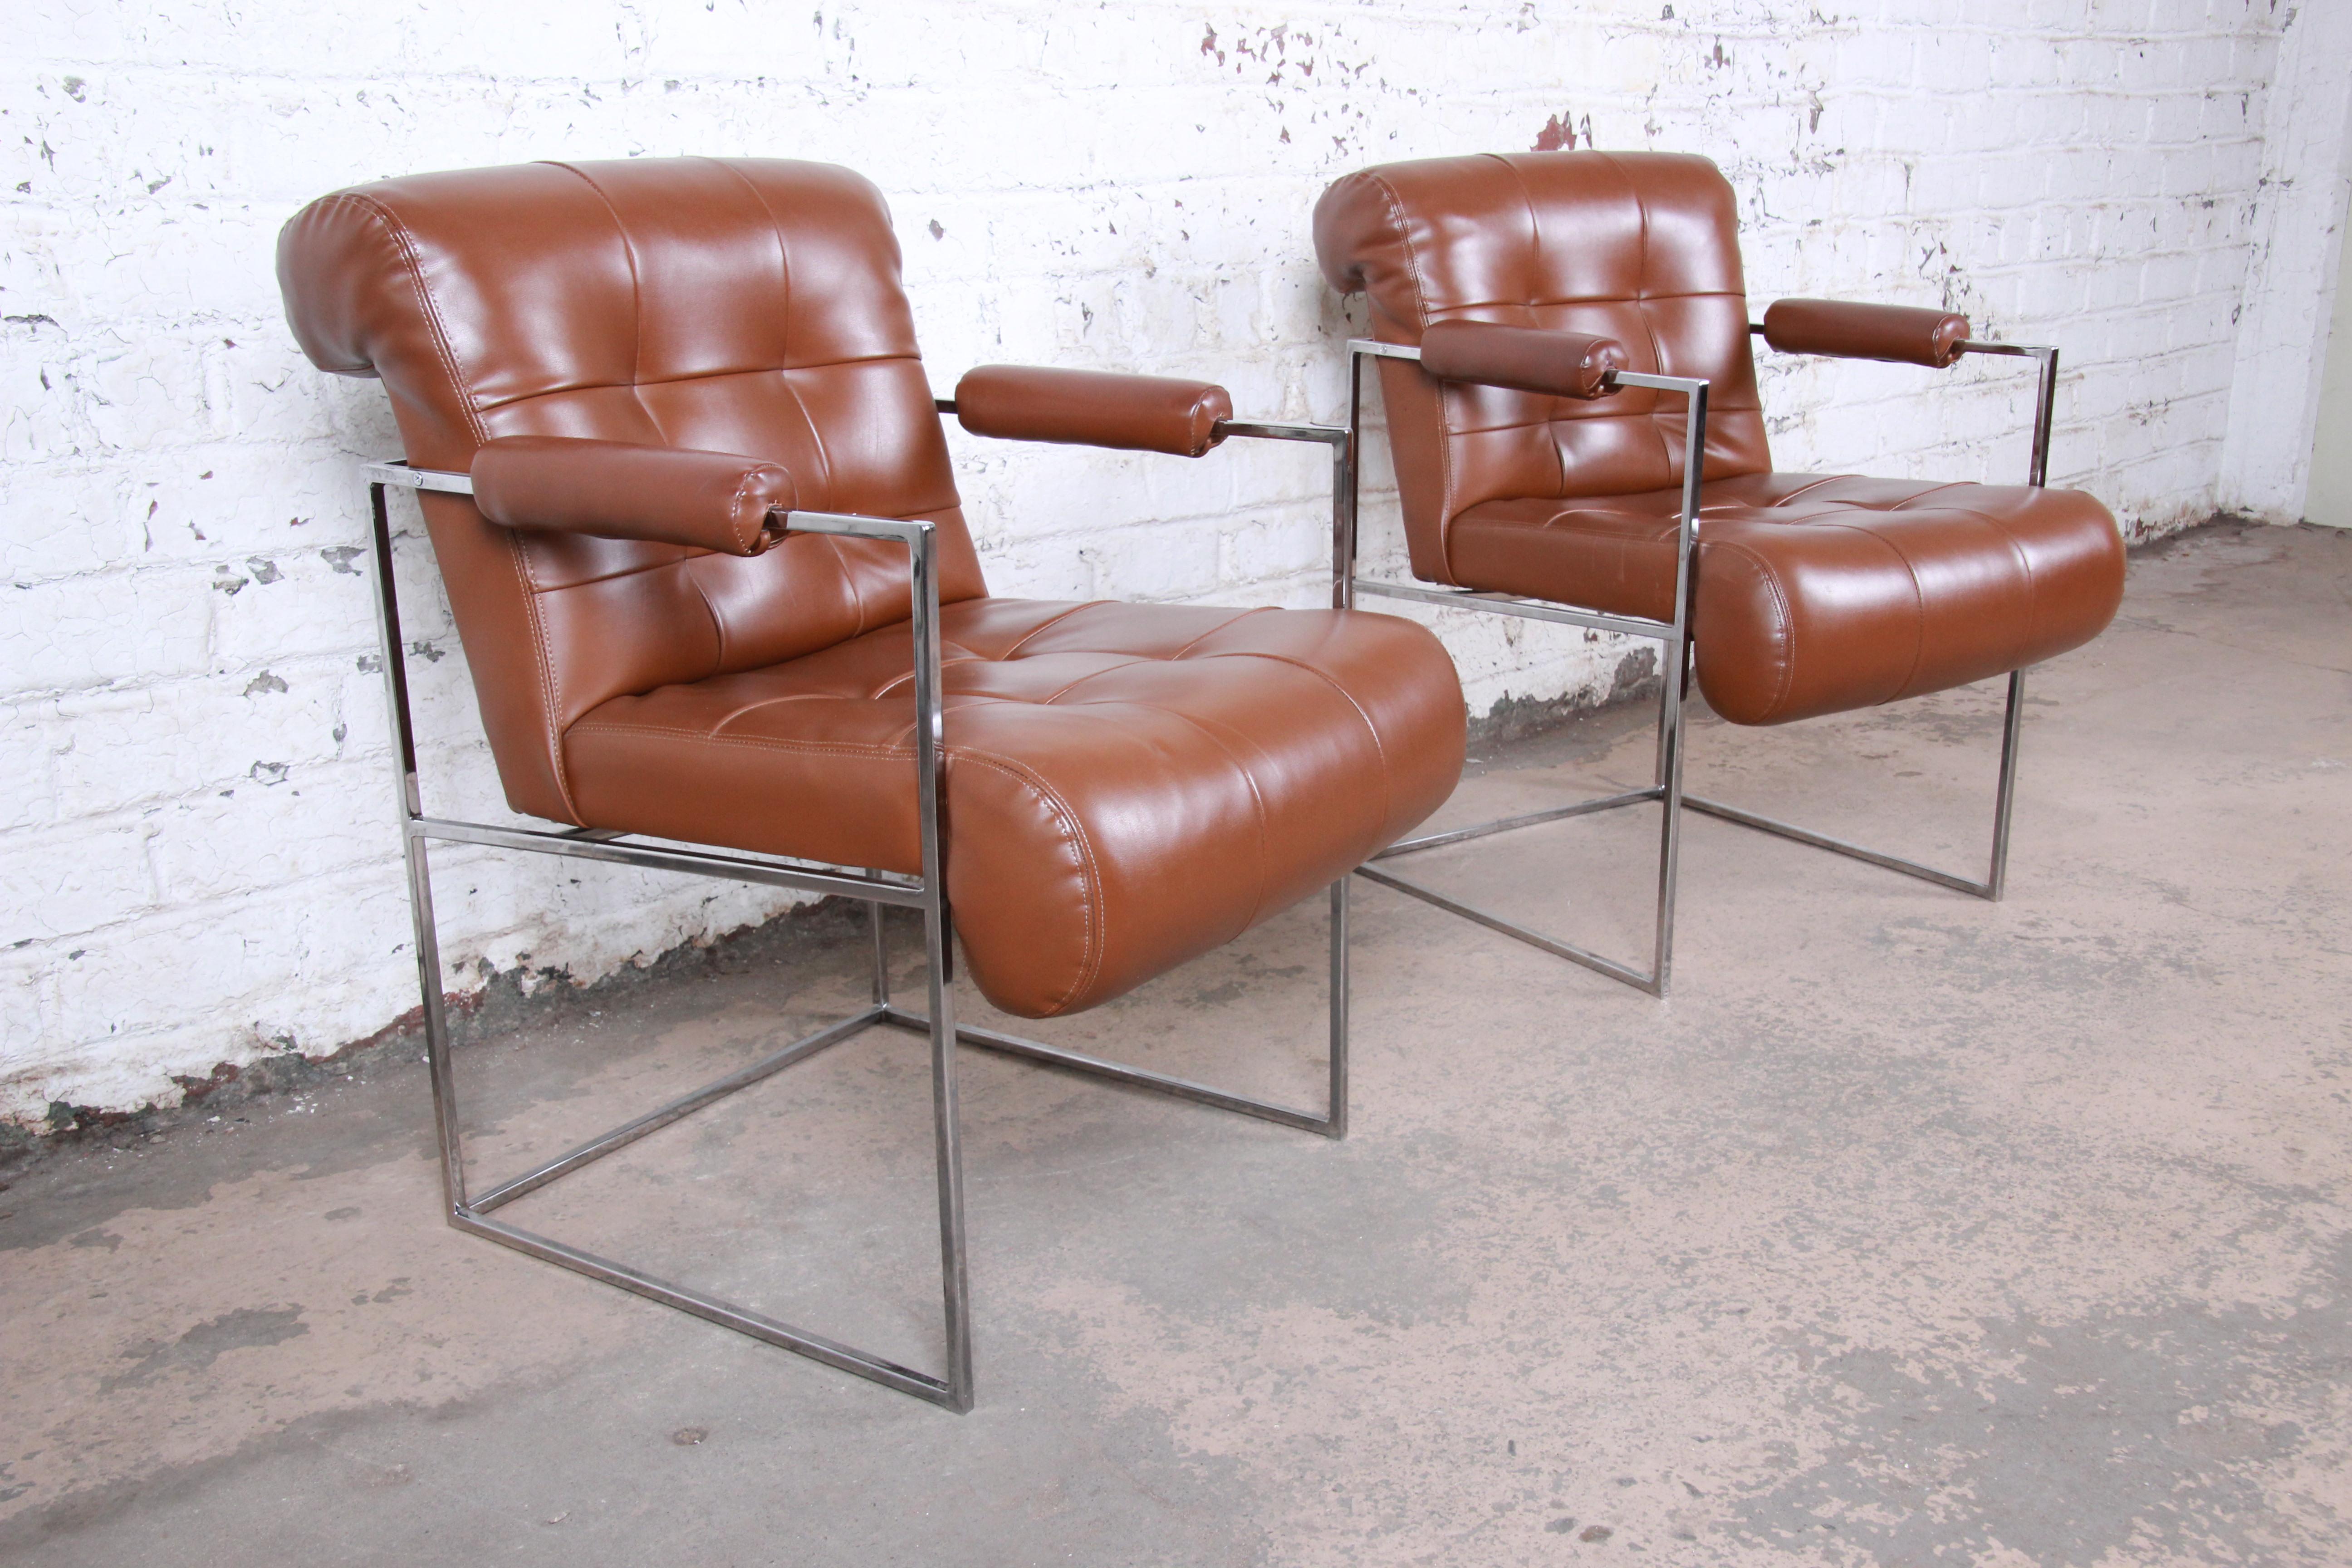 A gorgeous pair of Mid-Century Modern cube lounge chairs

Designed by Milo Baughman for Thayer Coggin

USA, 1970s

Tufted leather and chrome

Measures: 23